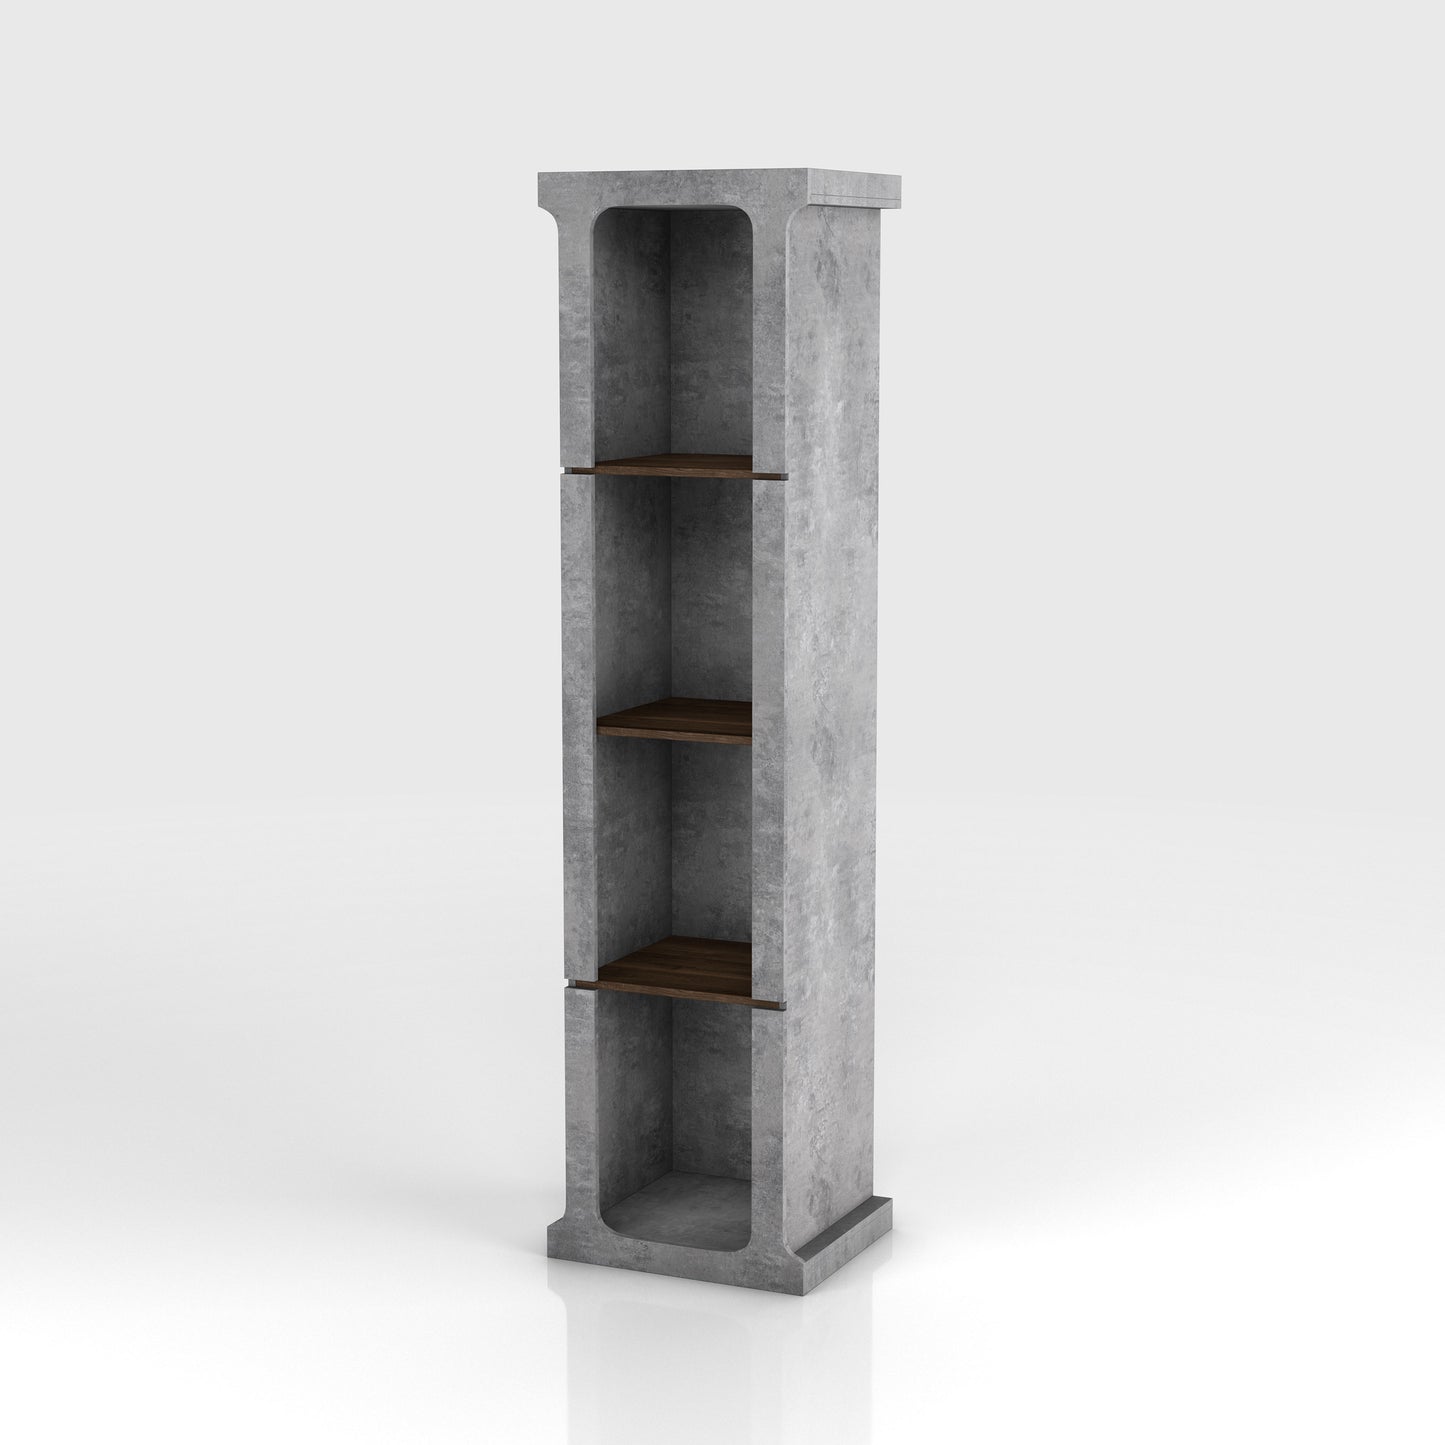 Left angled industrial cement and wood four-shelf media tower on a white background